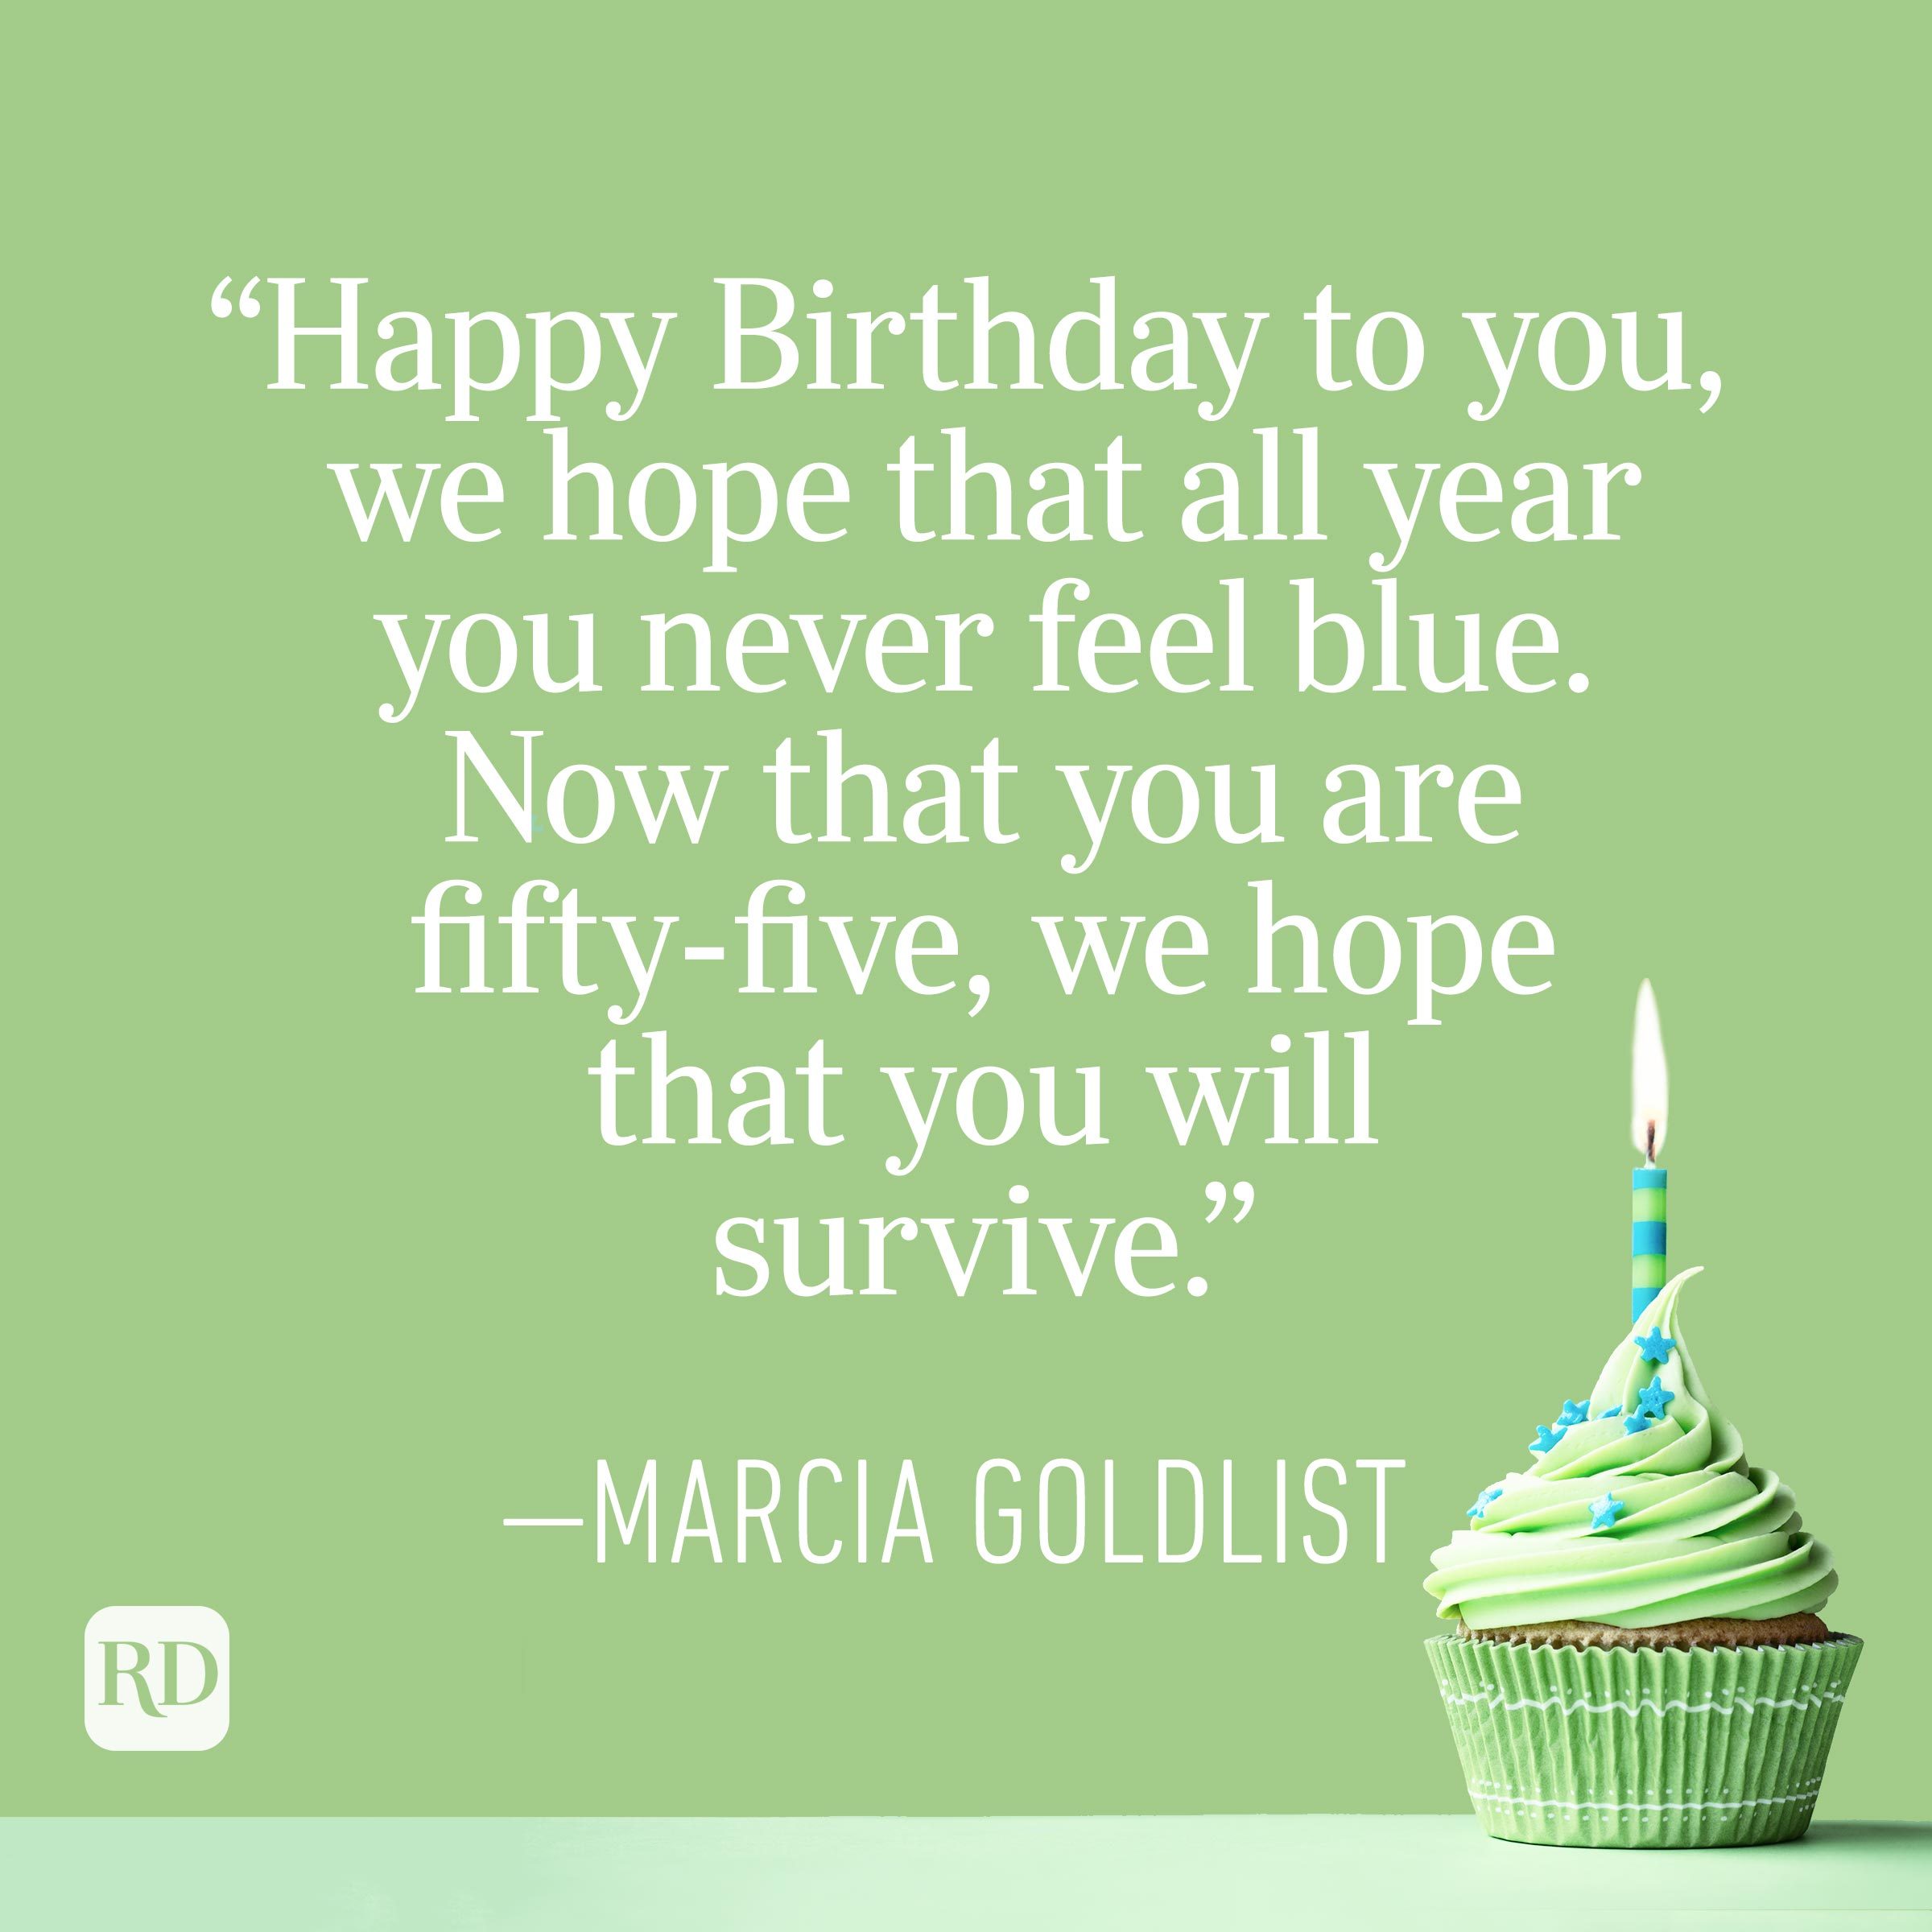 "Happy Birthday to you, we hope that all year you never feel blue. Now that you are fifty-five, we hope that you will survive." —Marcia Goldlist